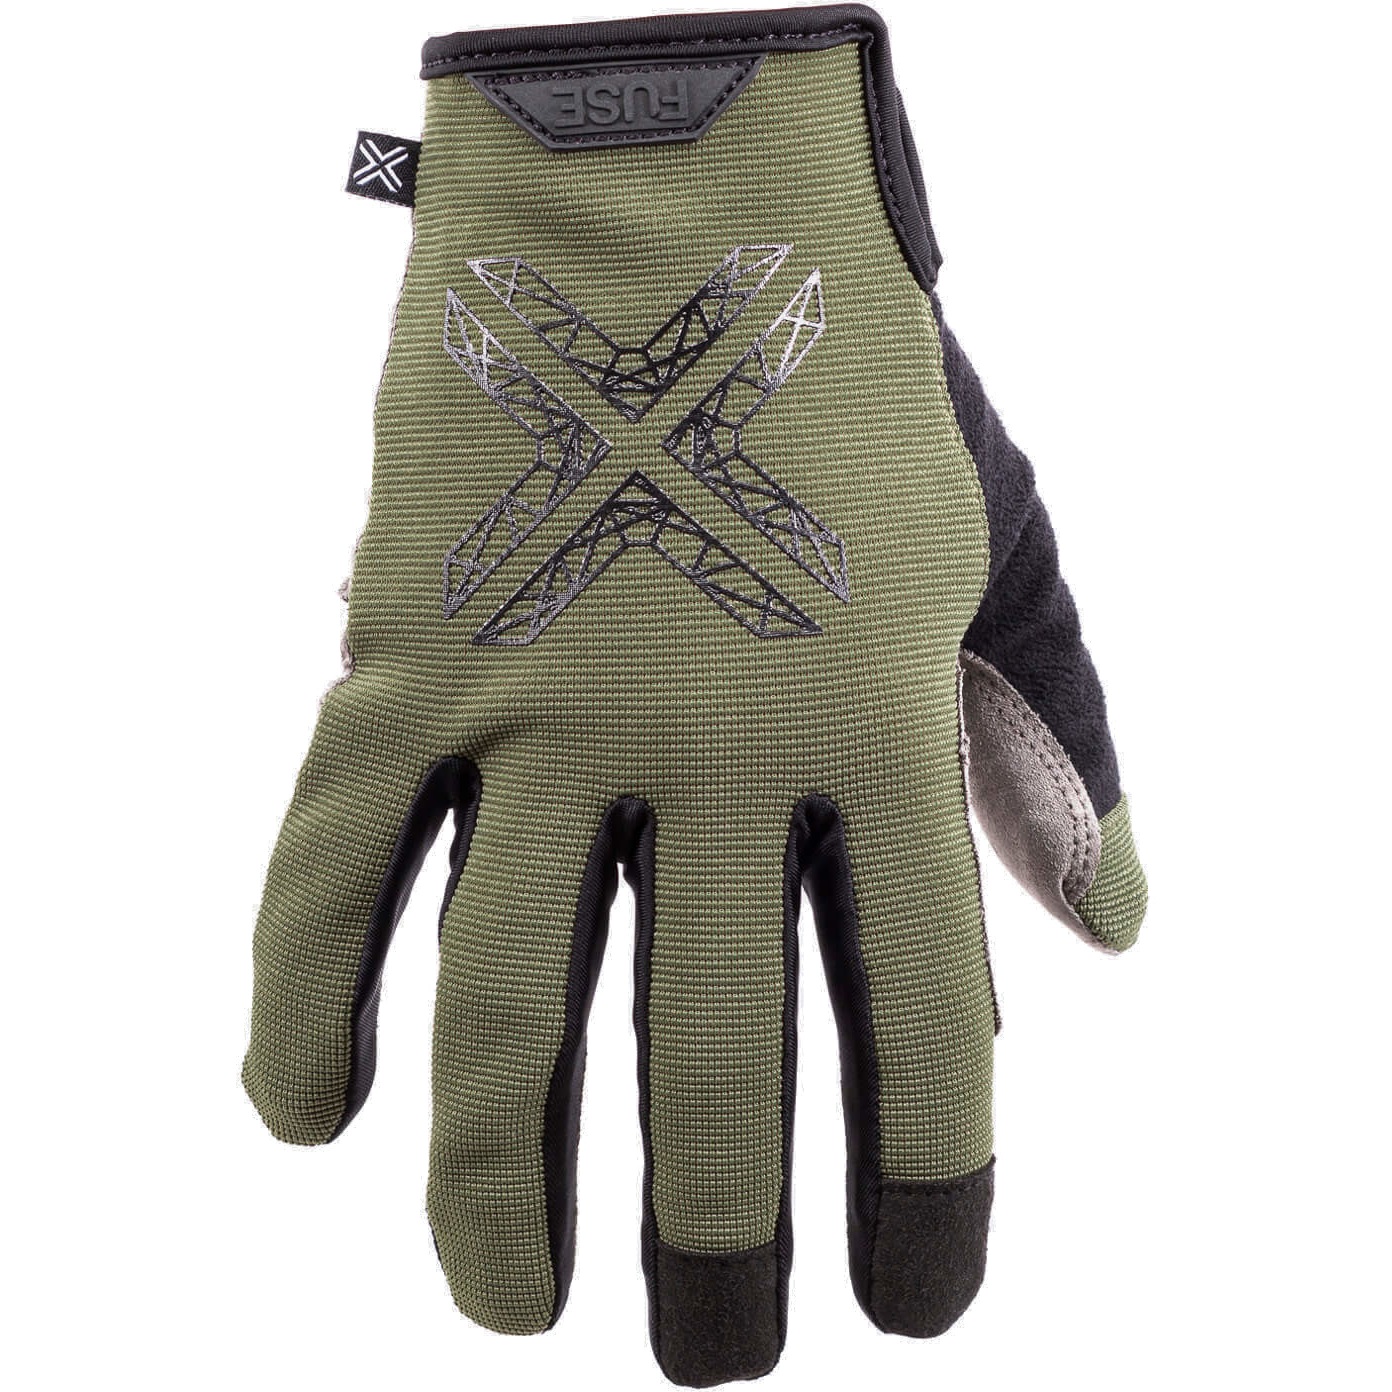 Productfoto van Fuse Stealth Gloves - green